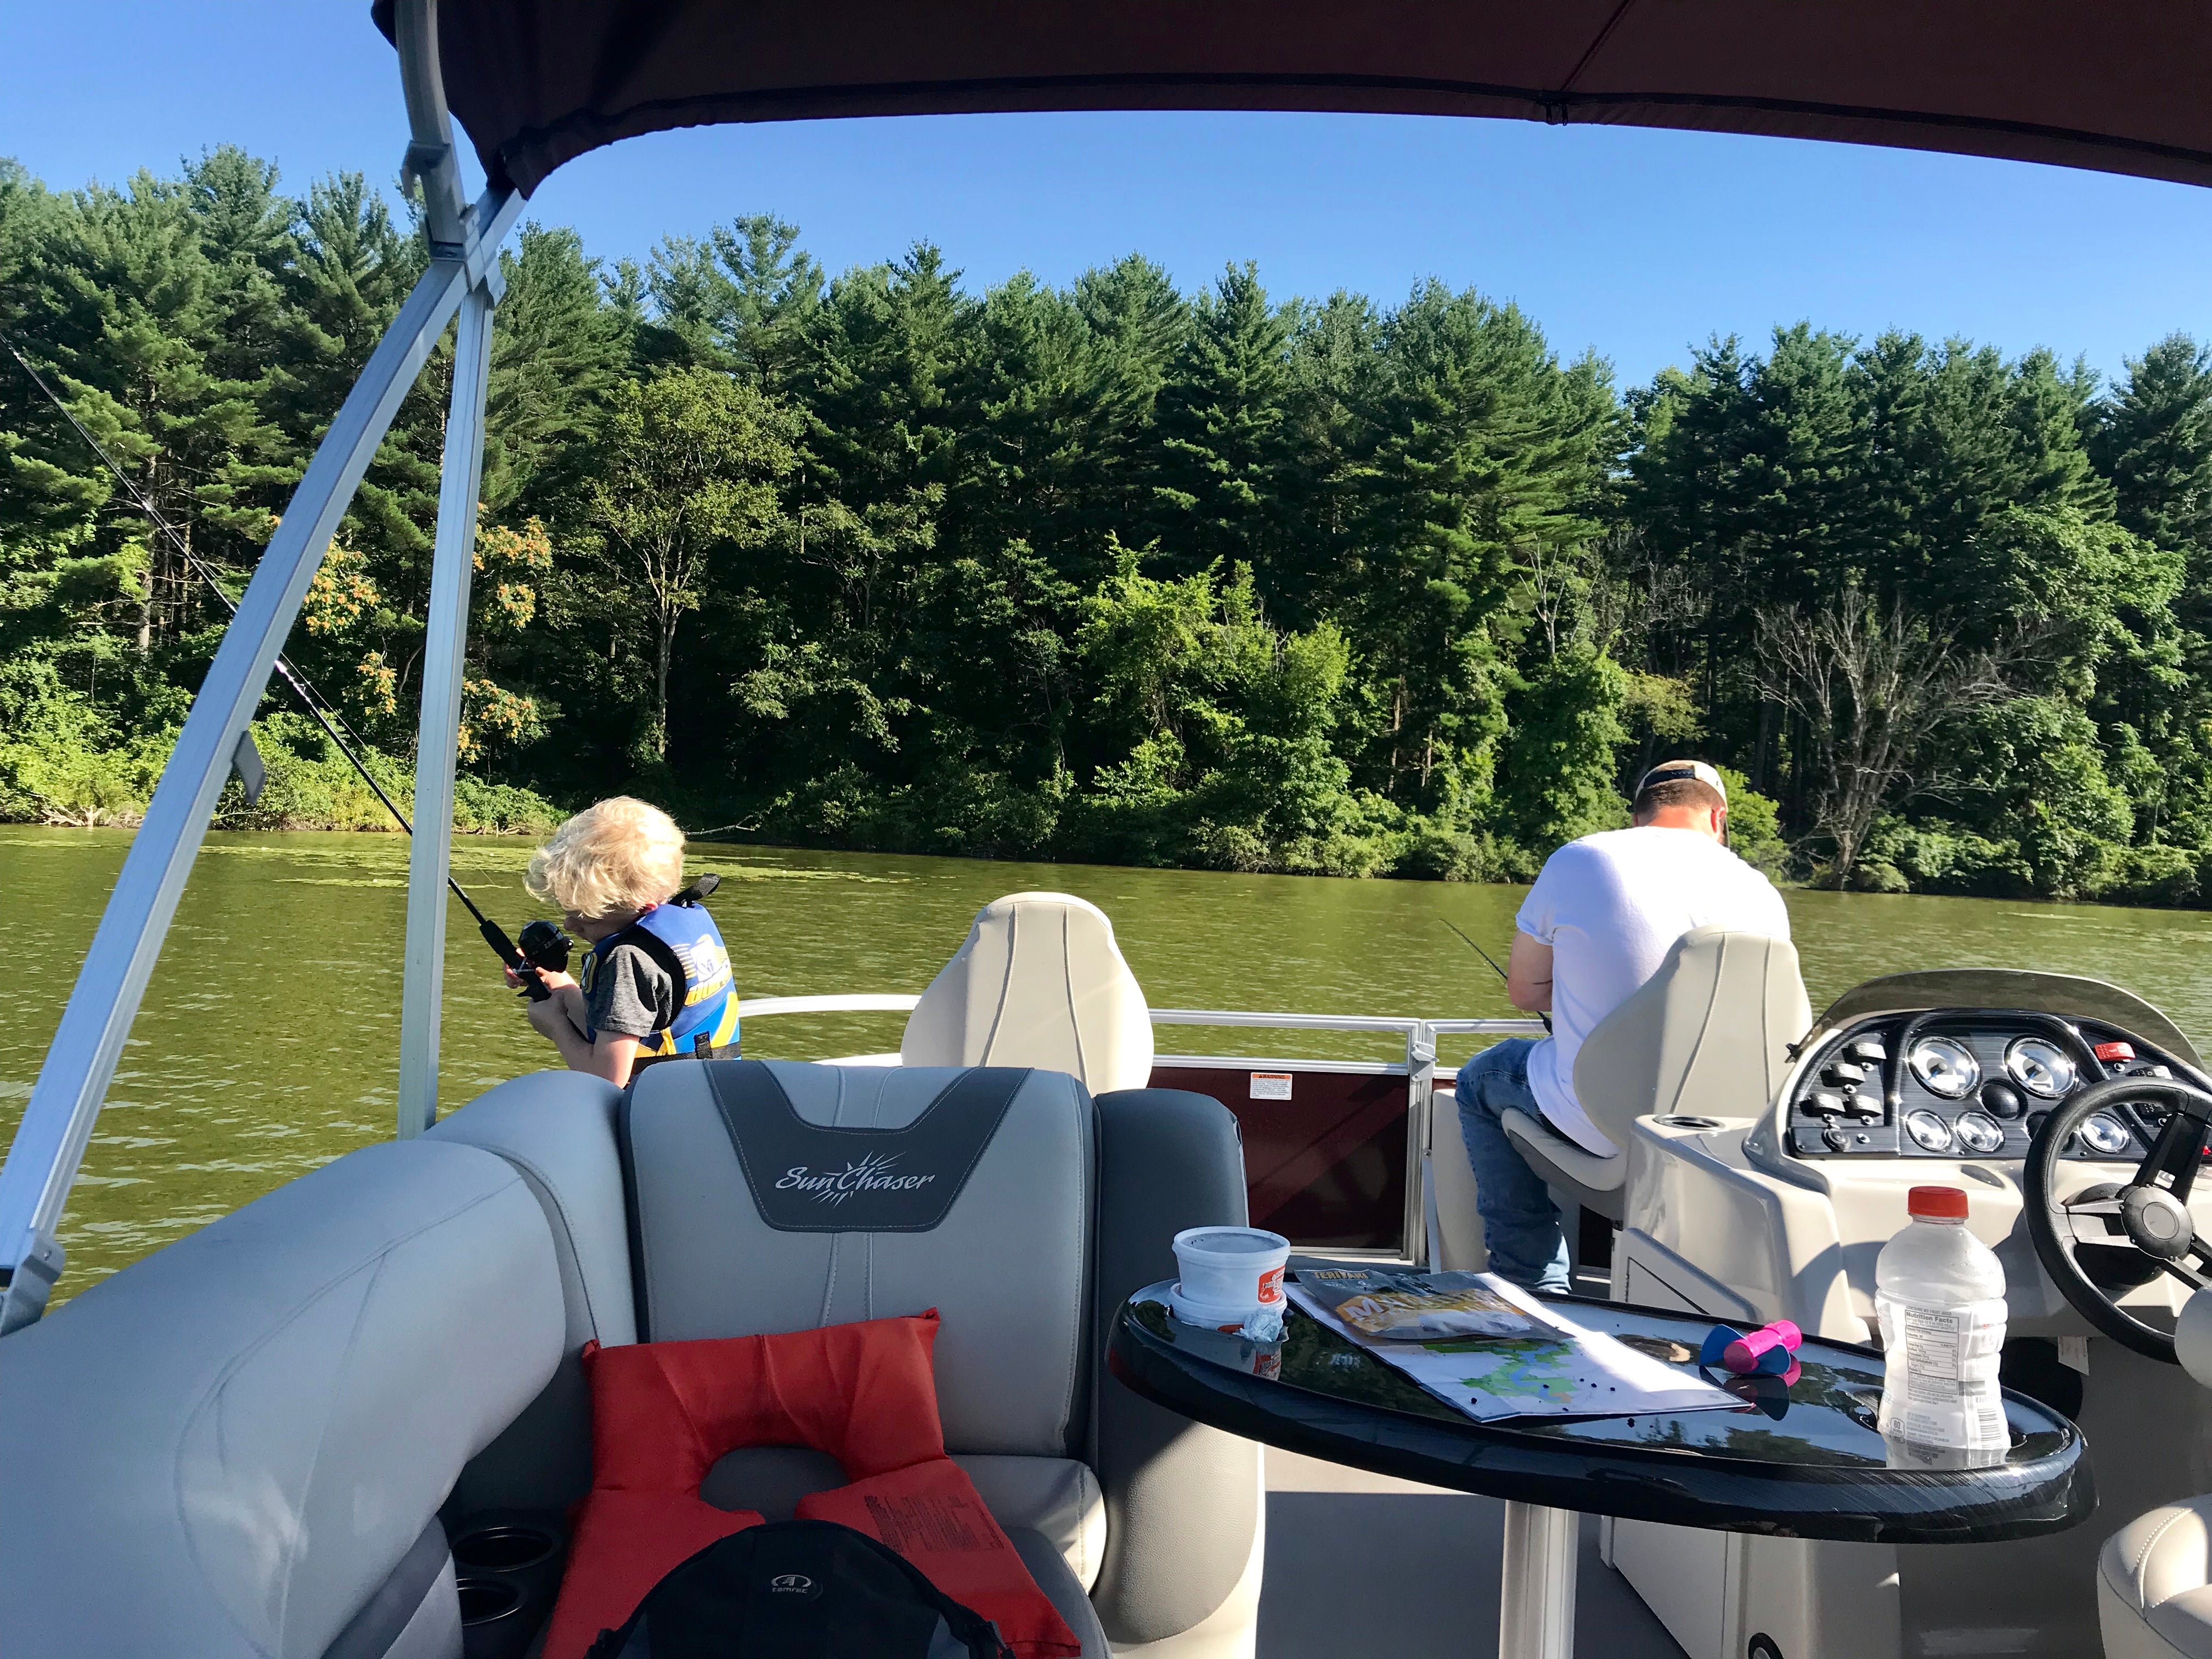 Pontoon boats are really nice and comfy. They provide lifevests. Do not need a boat license to rent as the top speed is 10mph.